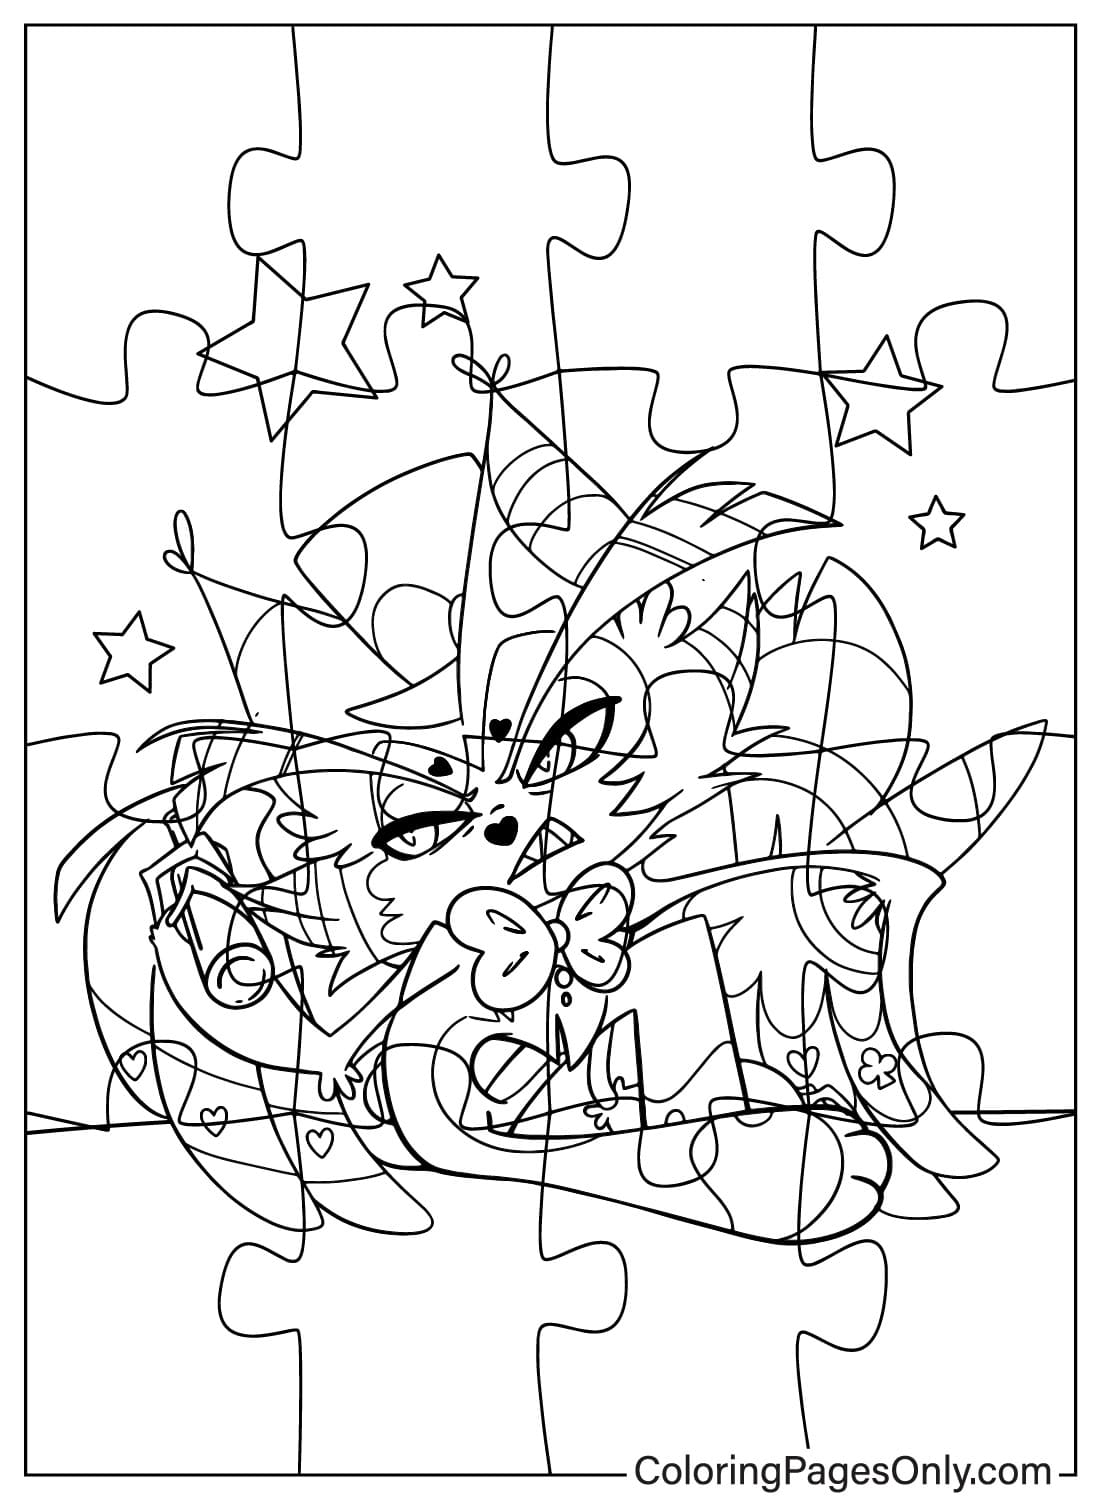 Husk Jigsaw Puzzle Coloring Page from Husk